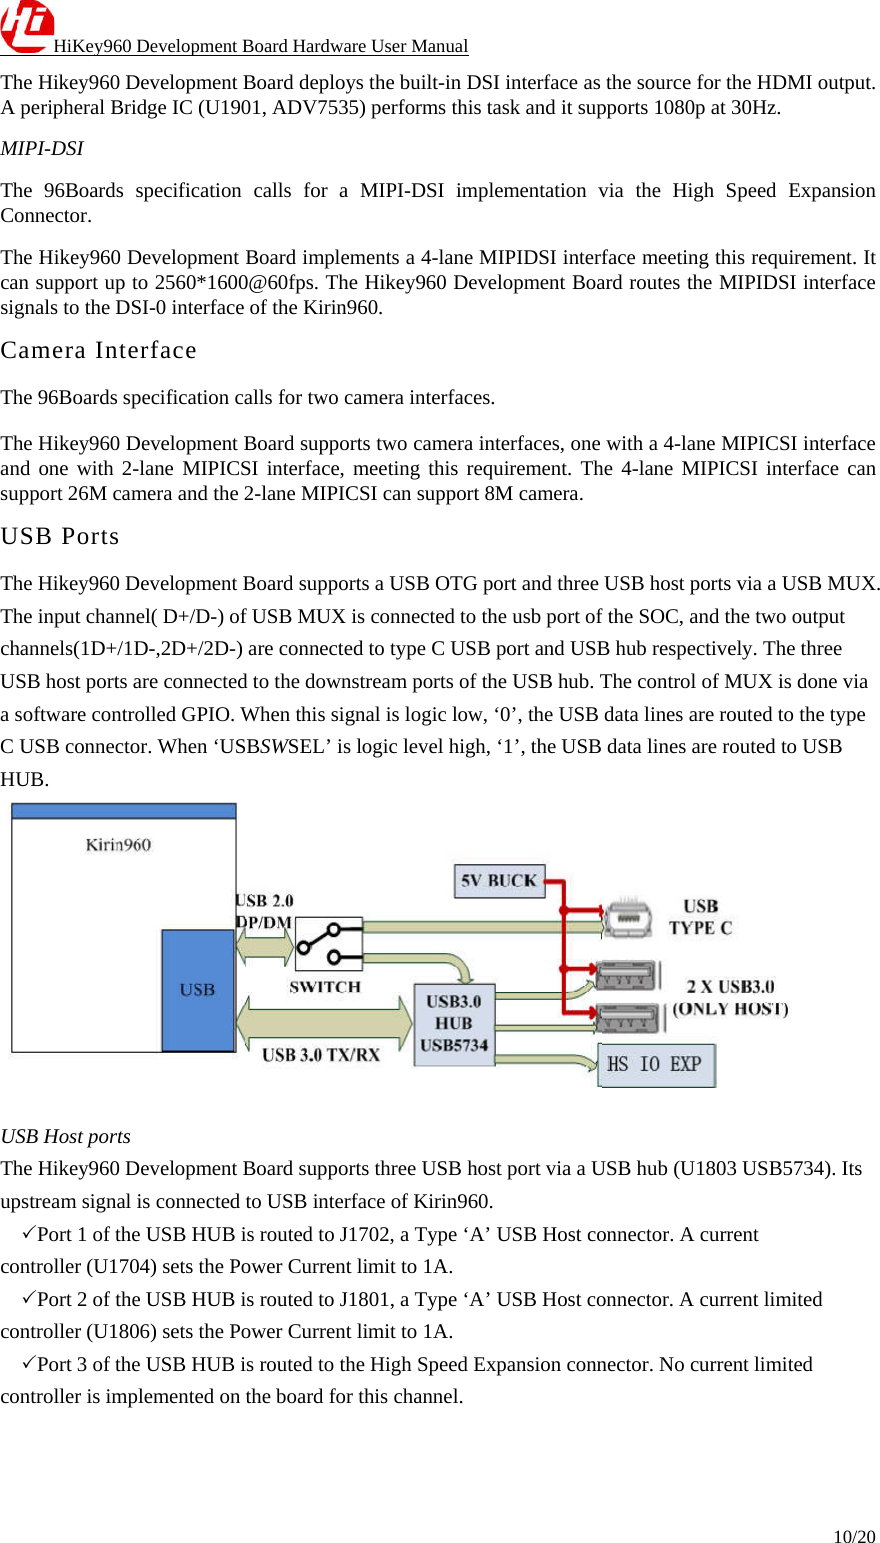 HiKey960 Development Board Hardware User Manual 10/20  The Hikey960 Development Board deploys the built-in DSI interface as the source for the HDMI output. A peripheral Bridge IC (U1901, ADV7535) performs this task and it supports 1080p at 30Hz. MIPI-DSI The 96Boards specification calls for a MIPI-DSI implementation via the High Speed Expansion Connector. The Hikey960 Development Board implements a 4-lane MIPIDSI interface meeting this requirement. It can support up to 2560*1600@60fps. The Hikey960 Development Board routes the MIPIDSI interface signals to the DSI-0 interface of the Kirin960. Camera Interface The 96Boards specification calls for two camera interfaces. The Hikey960 Development Board supports two camera interfaces, one with a 4-lane MIPICSI interface and one with 2-lane MIPICSI interface, meeting this requirement. The 4-lane MIPICSI interface can support 26M camera and the 2-lane MIPICSI can support 8M camera. USB Ports The Hikey960 Development Board supports a USB OTG port and three USB host ports via a USB MUX. The input channel( D+/D-) of USB MUX is connected to the usb port of the SOC, and the two output channels(1D+/1D-,2D+/2D-) are connected to type C USB port and USB hub respectively. The three USB host ports are connected to the downstream ports of the USB hub. The control of MUX is done via a software controlled GPIO. When this signal is logic low, ‘0’, the USB data lines are routed to the type C USB connector. When ‘USBSWSEL’ is logic level high, ‘1’, the USB data lines are routed to USB HUB.   USB Host ports The Hikey960 Development Board supports three USB host port via a USB hub (U1803 USB5734). Its upstream signal is connected to USB interface of Kirin960. 　Port 1 of the USB HUB is routed to J1702, a Type ‘A’ USB Host connector. A current controller (U1704) sets the Power Current limit to 1A. 　Port 2 of the USB HUB is routed to J1801, a Type ‘A’ USB Host connector. A current limited controller (U1806) sets the Power Current limit to 1A. 　Port 3 of the USB HUB is routed to the High Speed Expansion connector. No current limited controller is implemented on the board for this channel.   